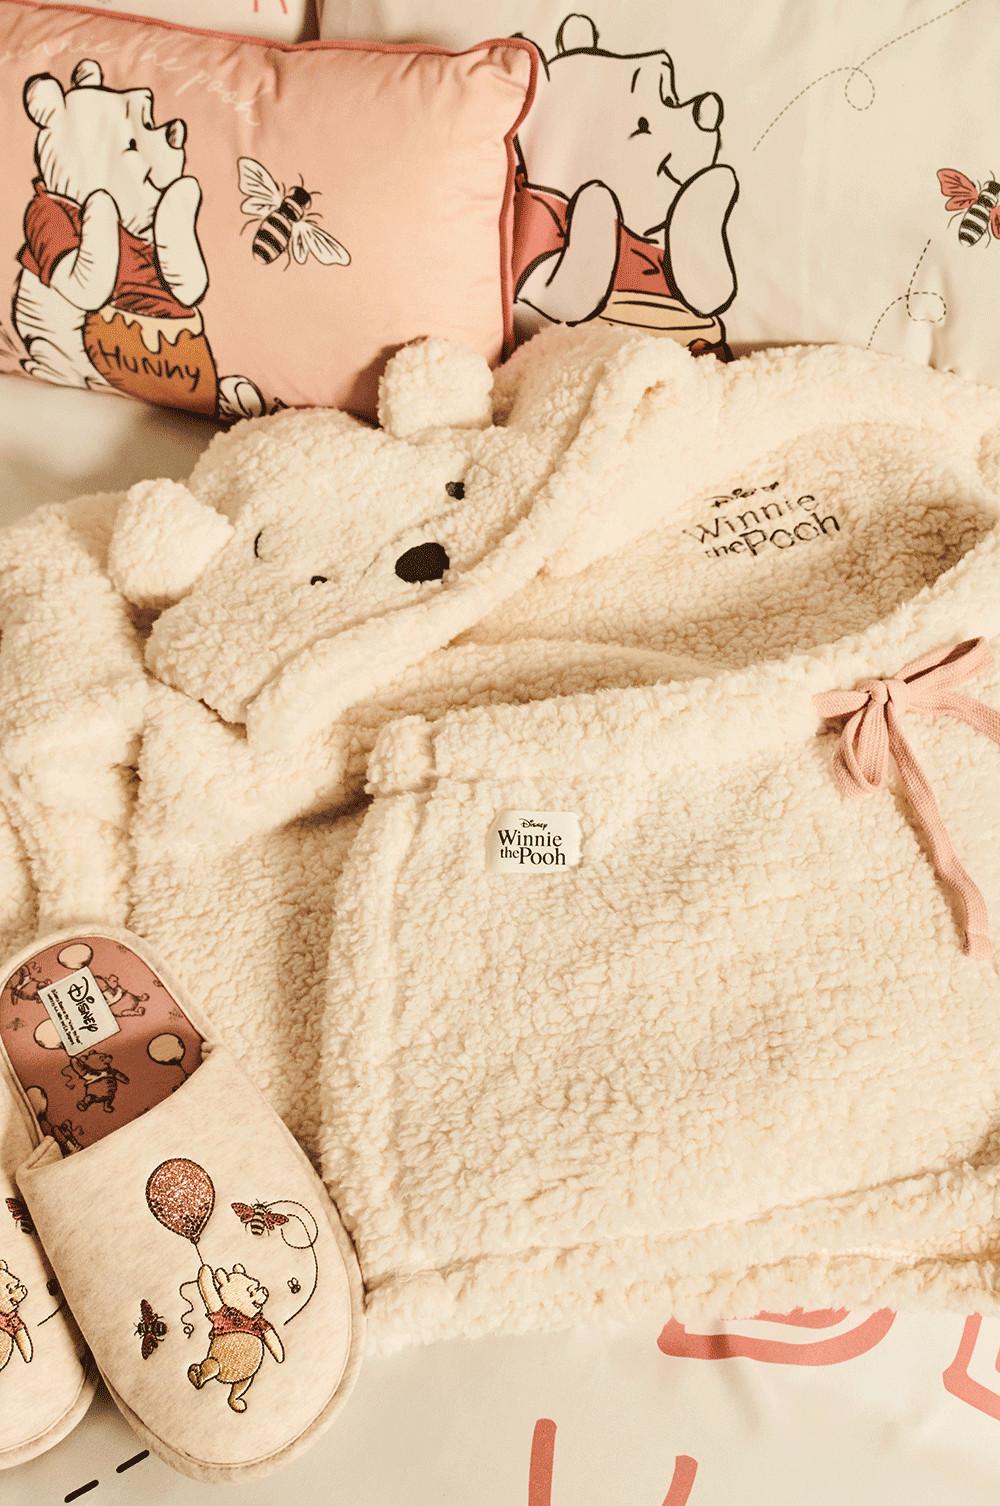 Introducing our Primark collection Disney's Winnie The Pooh | Primark